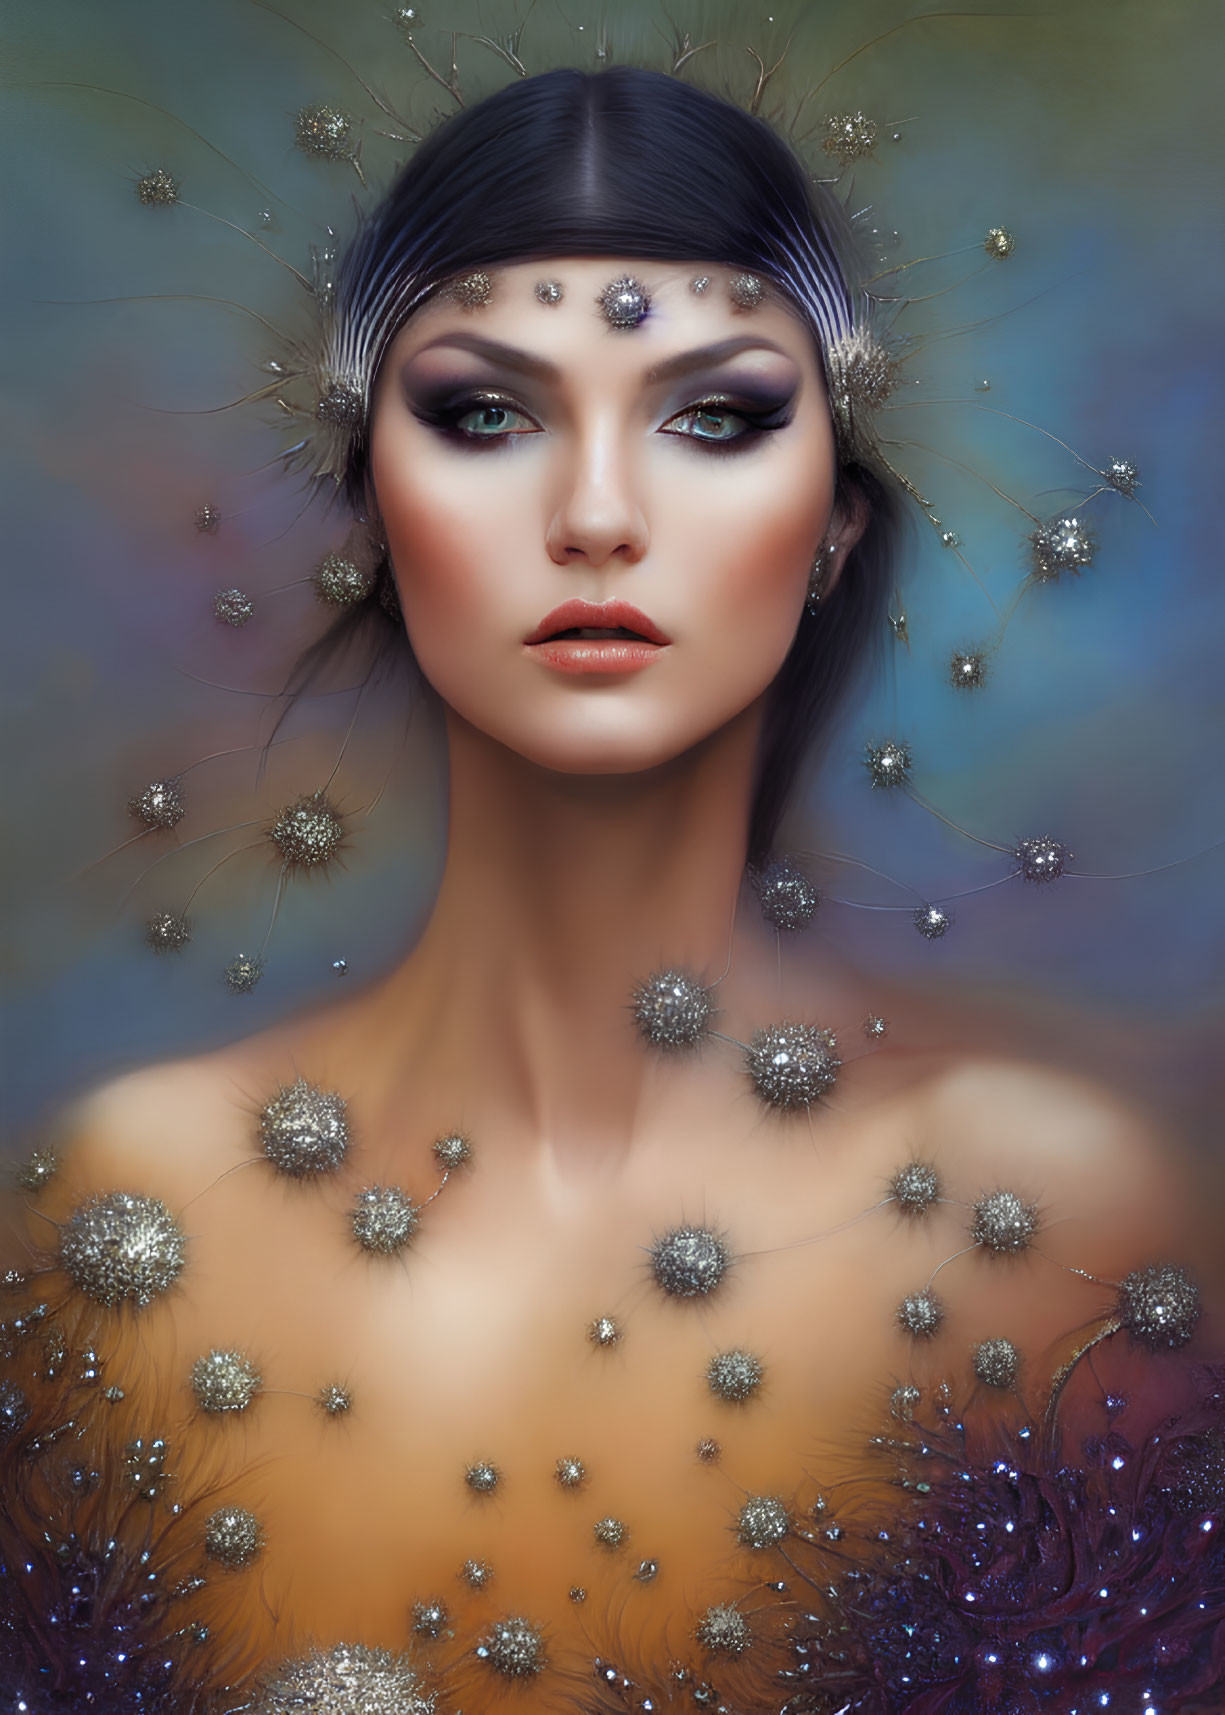 Portrait of Woman with Dandelion-Inspired Headpiece on Gradient Background